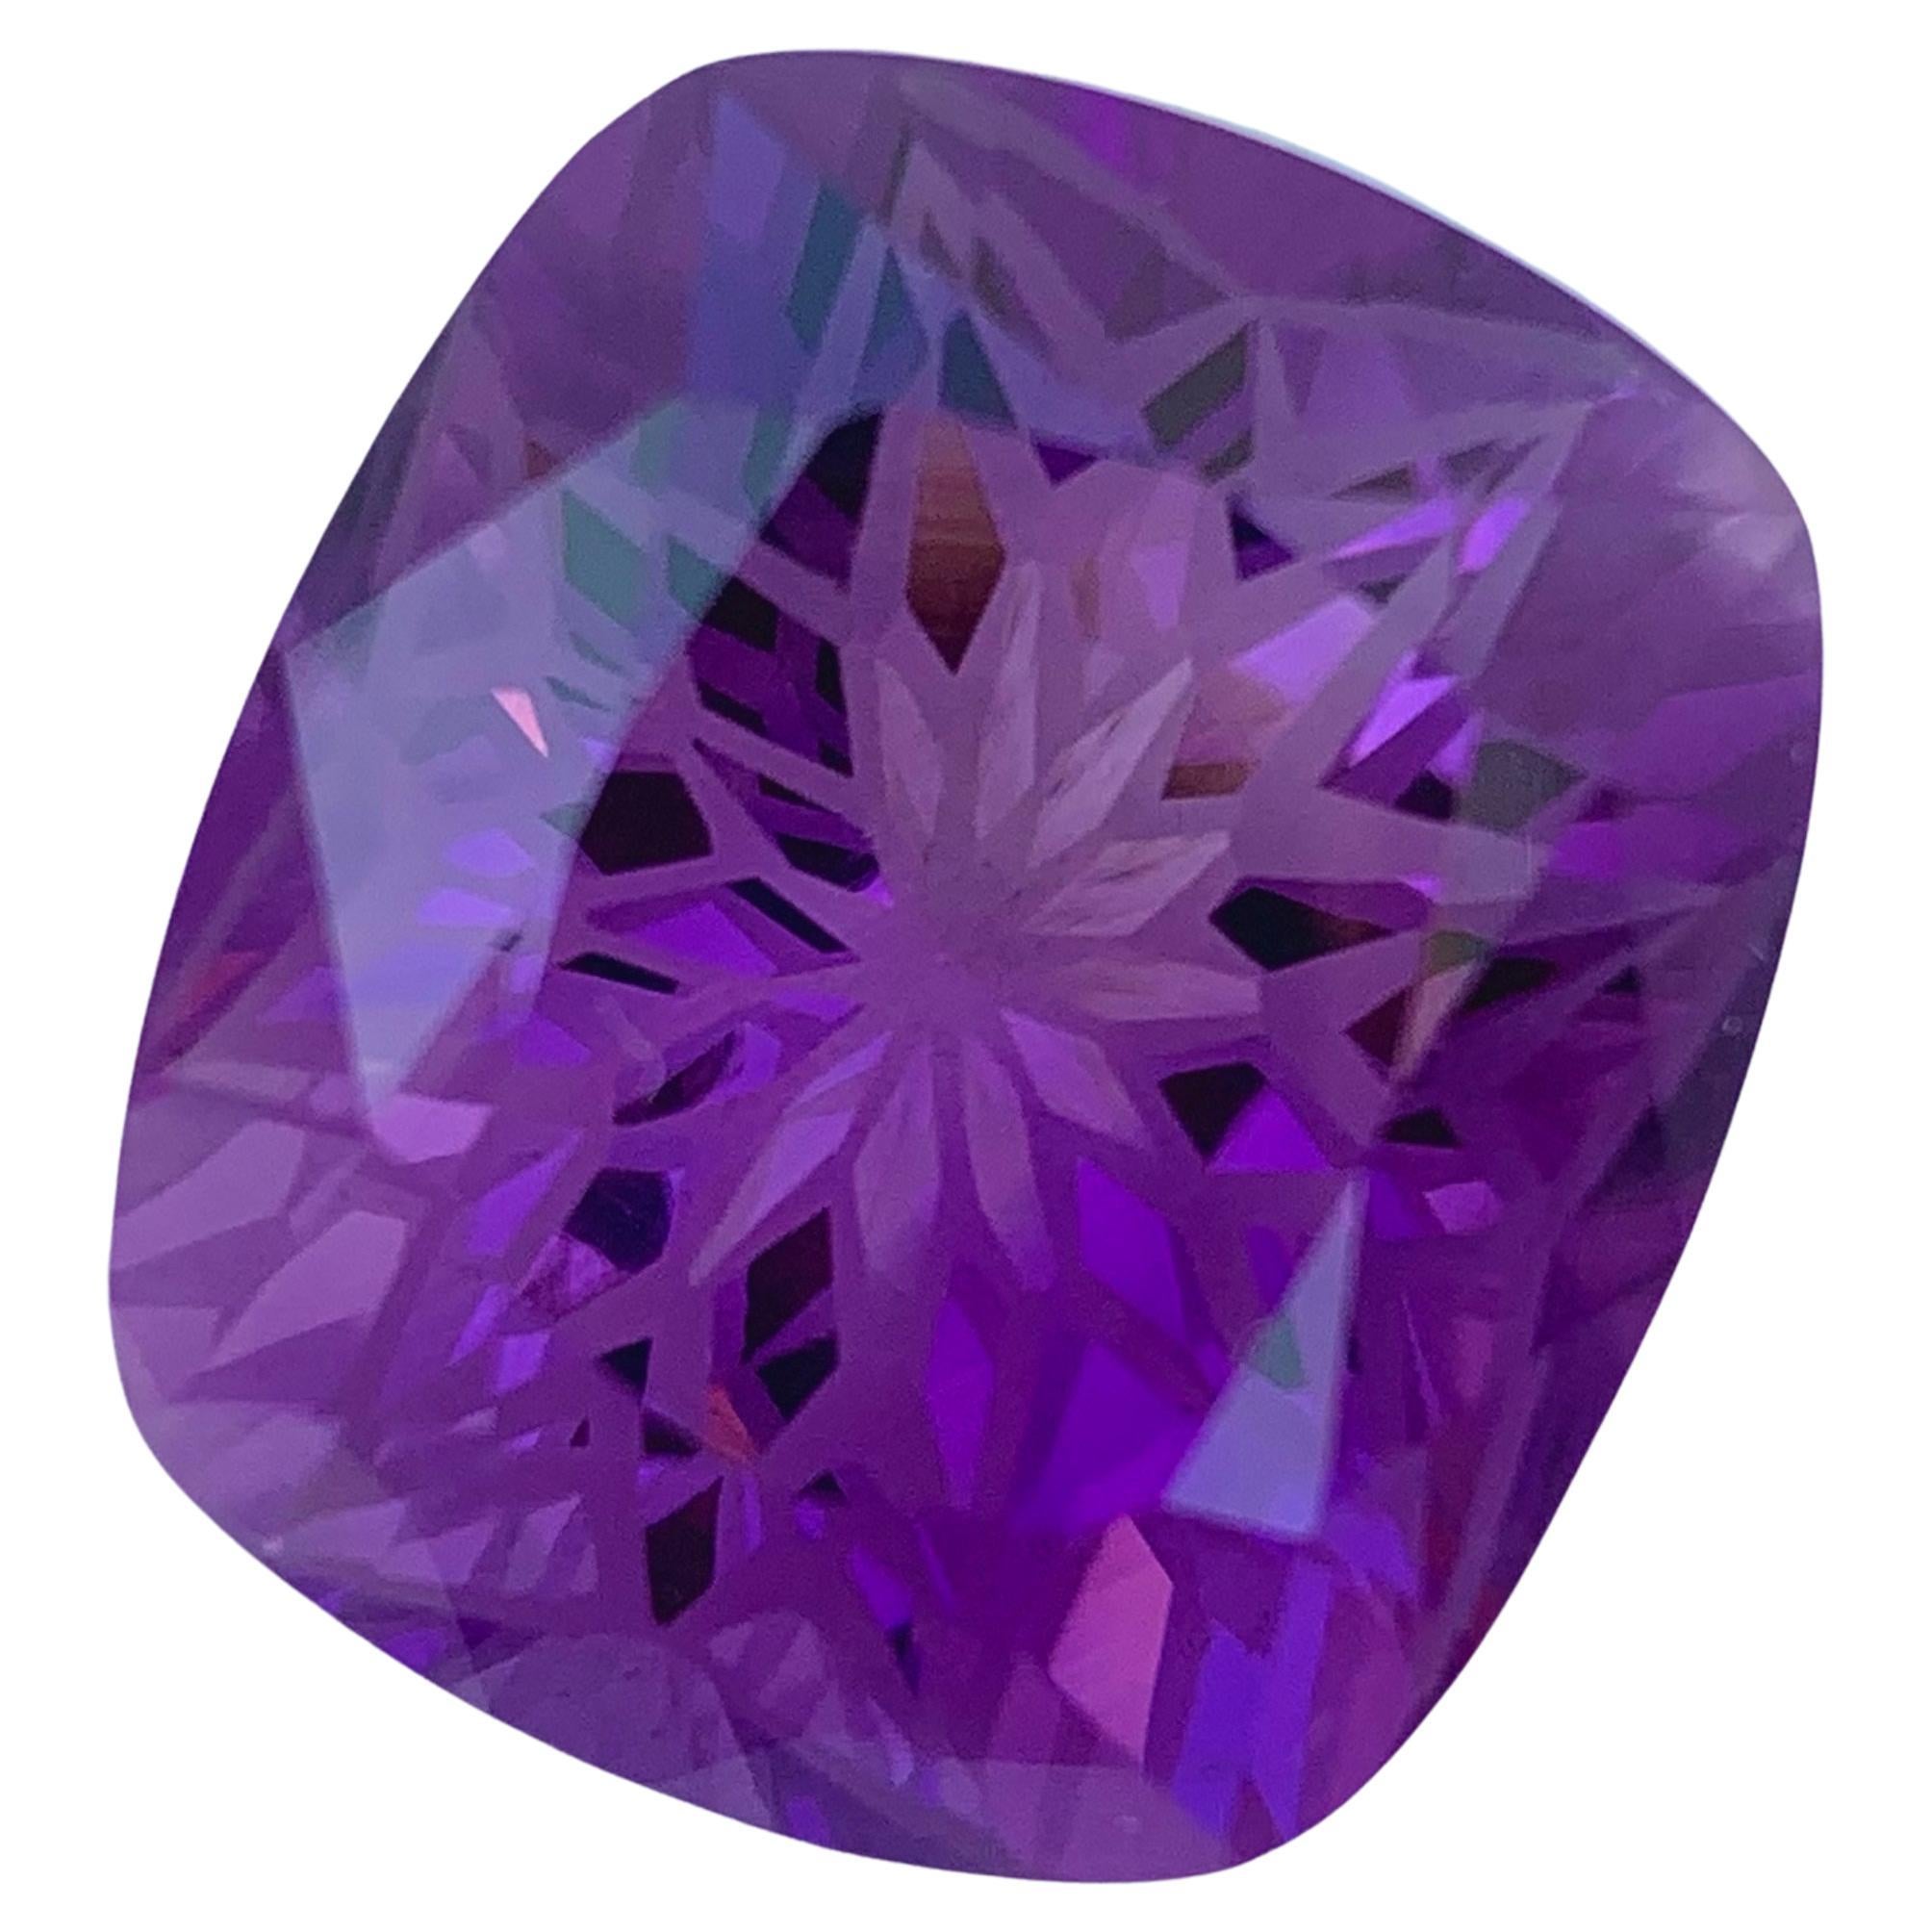 Spectacular Frosted Cut Amethyst Gemstone 29.25 CTS Purple Amethyst High Quality For Sale